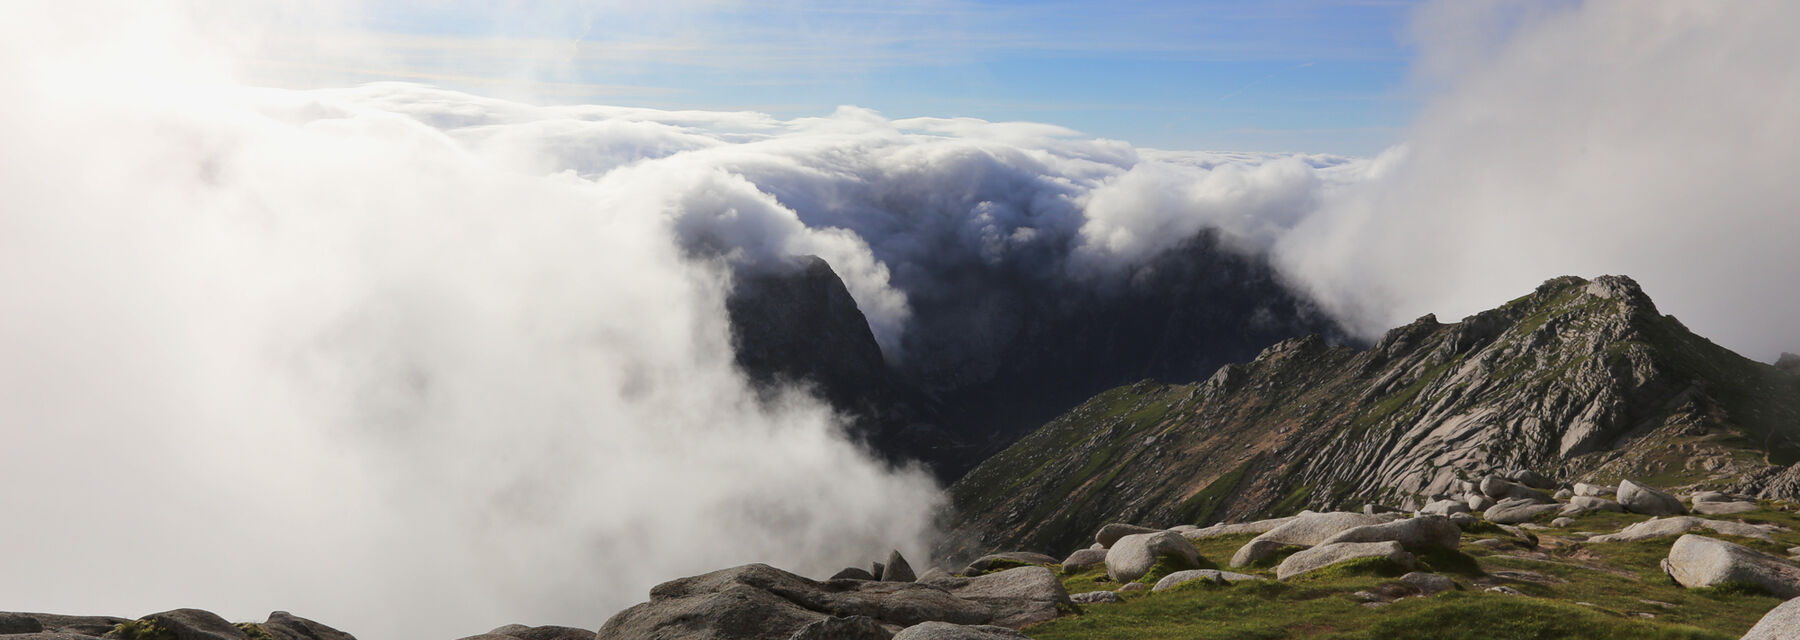 The summit of Goat Fell on Arran, seen with white clouds swirling around.